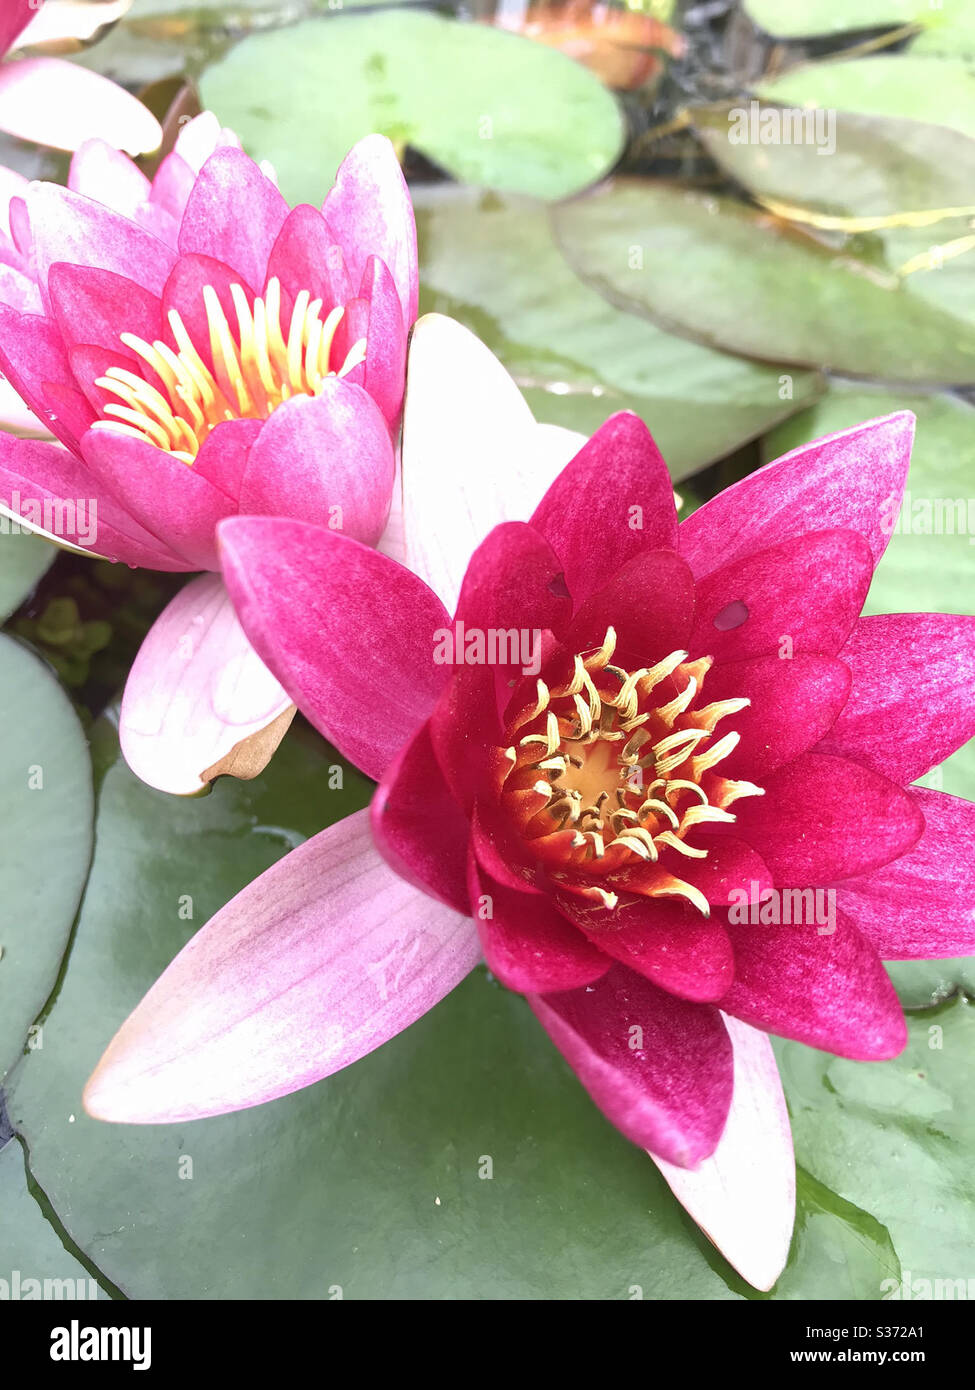 Blooming water lilies in a garden pond Stock Photo